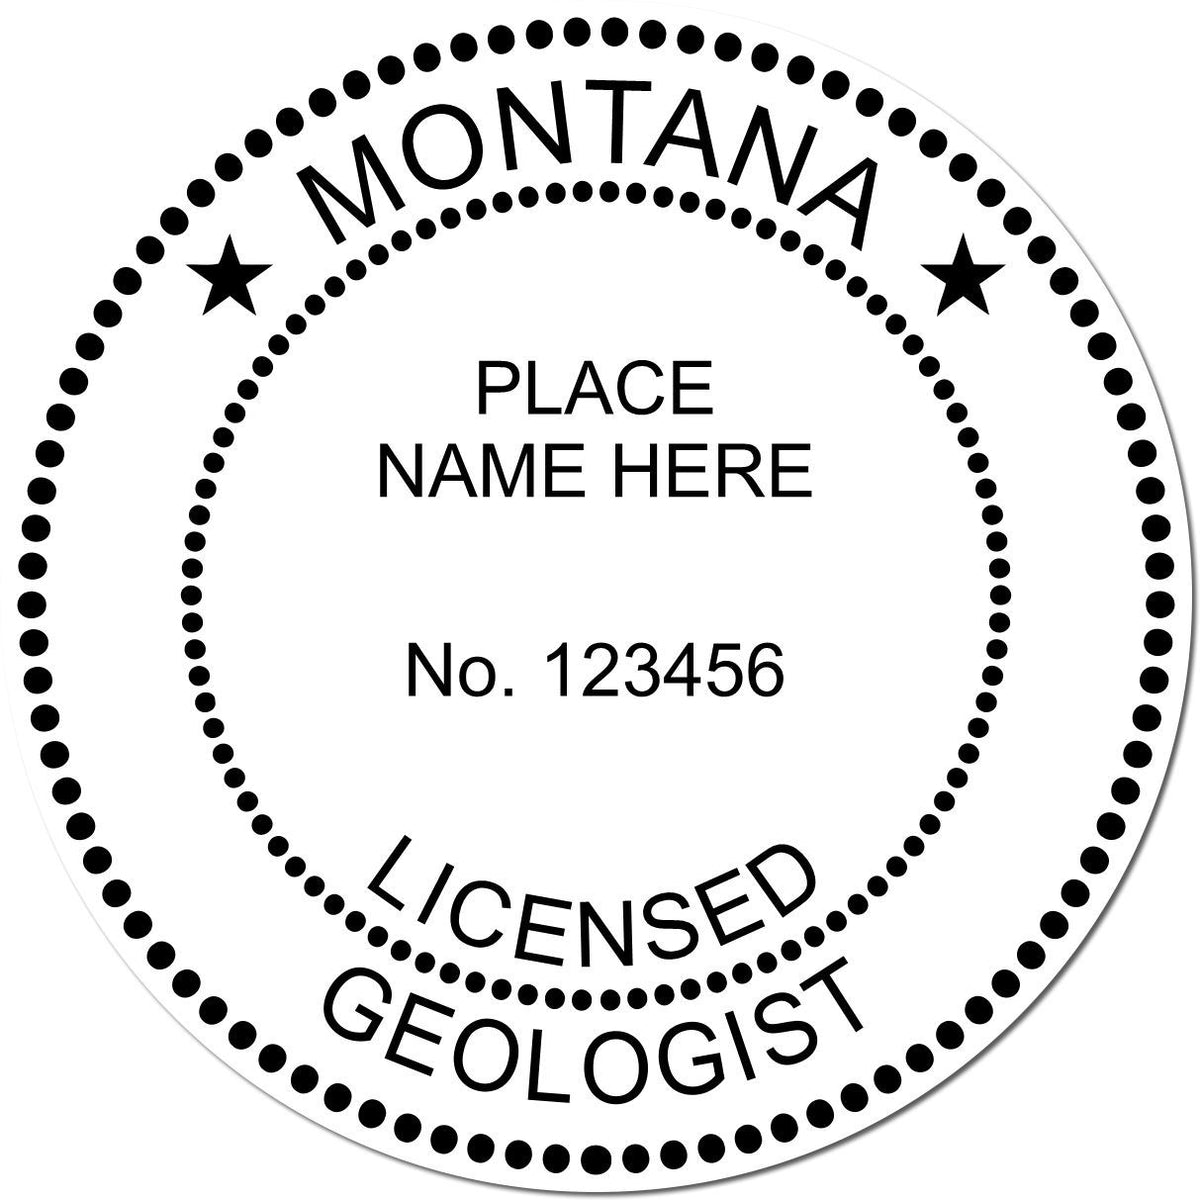 This paper is stamped with a sample imprint of the Digital Montana Geologist Stamp, Electronic Seal for Montana Geologist, signifying its quality and reliability.